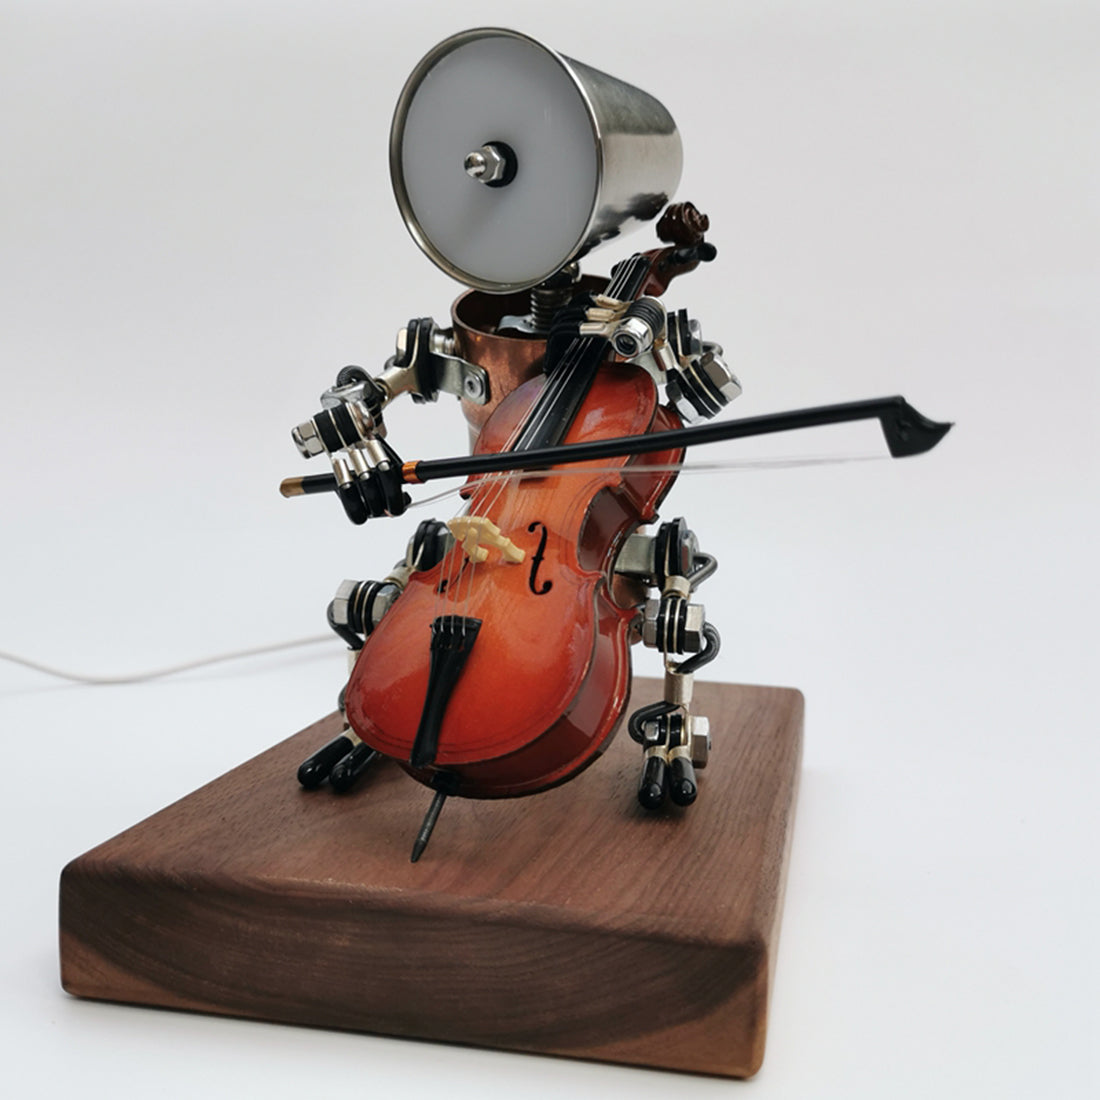 Steampunk Style Assembled 3D Metal Musician Bassists Model Lamp 2-IN-1Desk Decor  Crafts